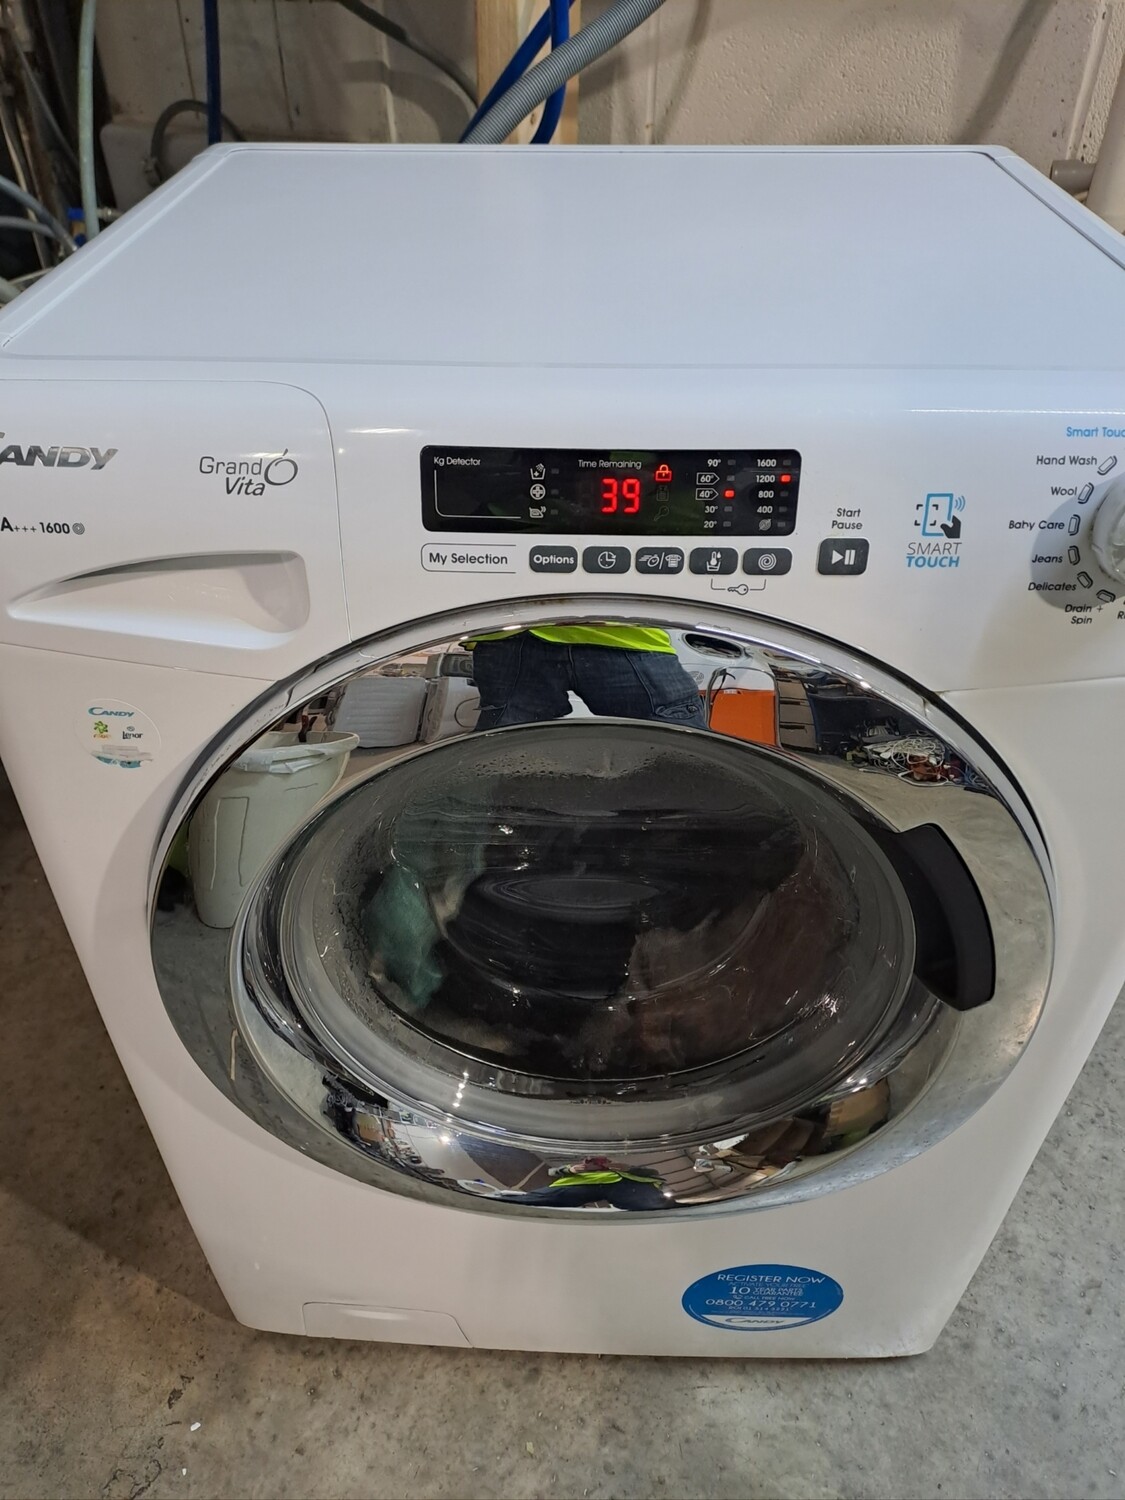 Candy A+++ GVS1690C3-80 9kg 1600 Spin Washing Machine Refurbished + 6 Months Guarantee. This item is located in our Whitby Road 